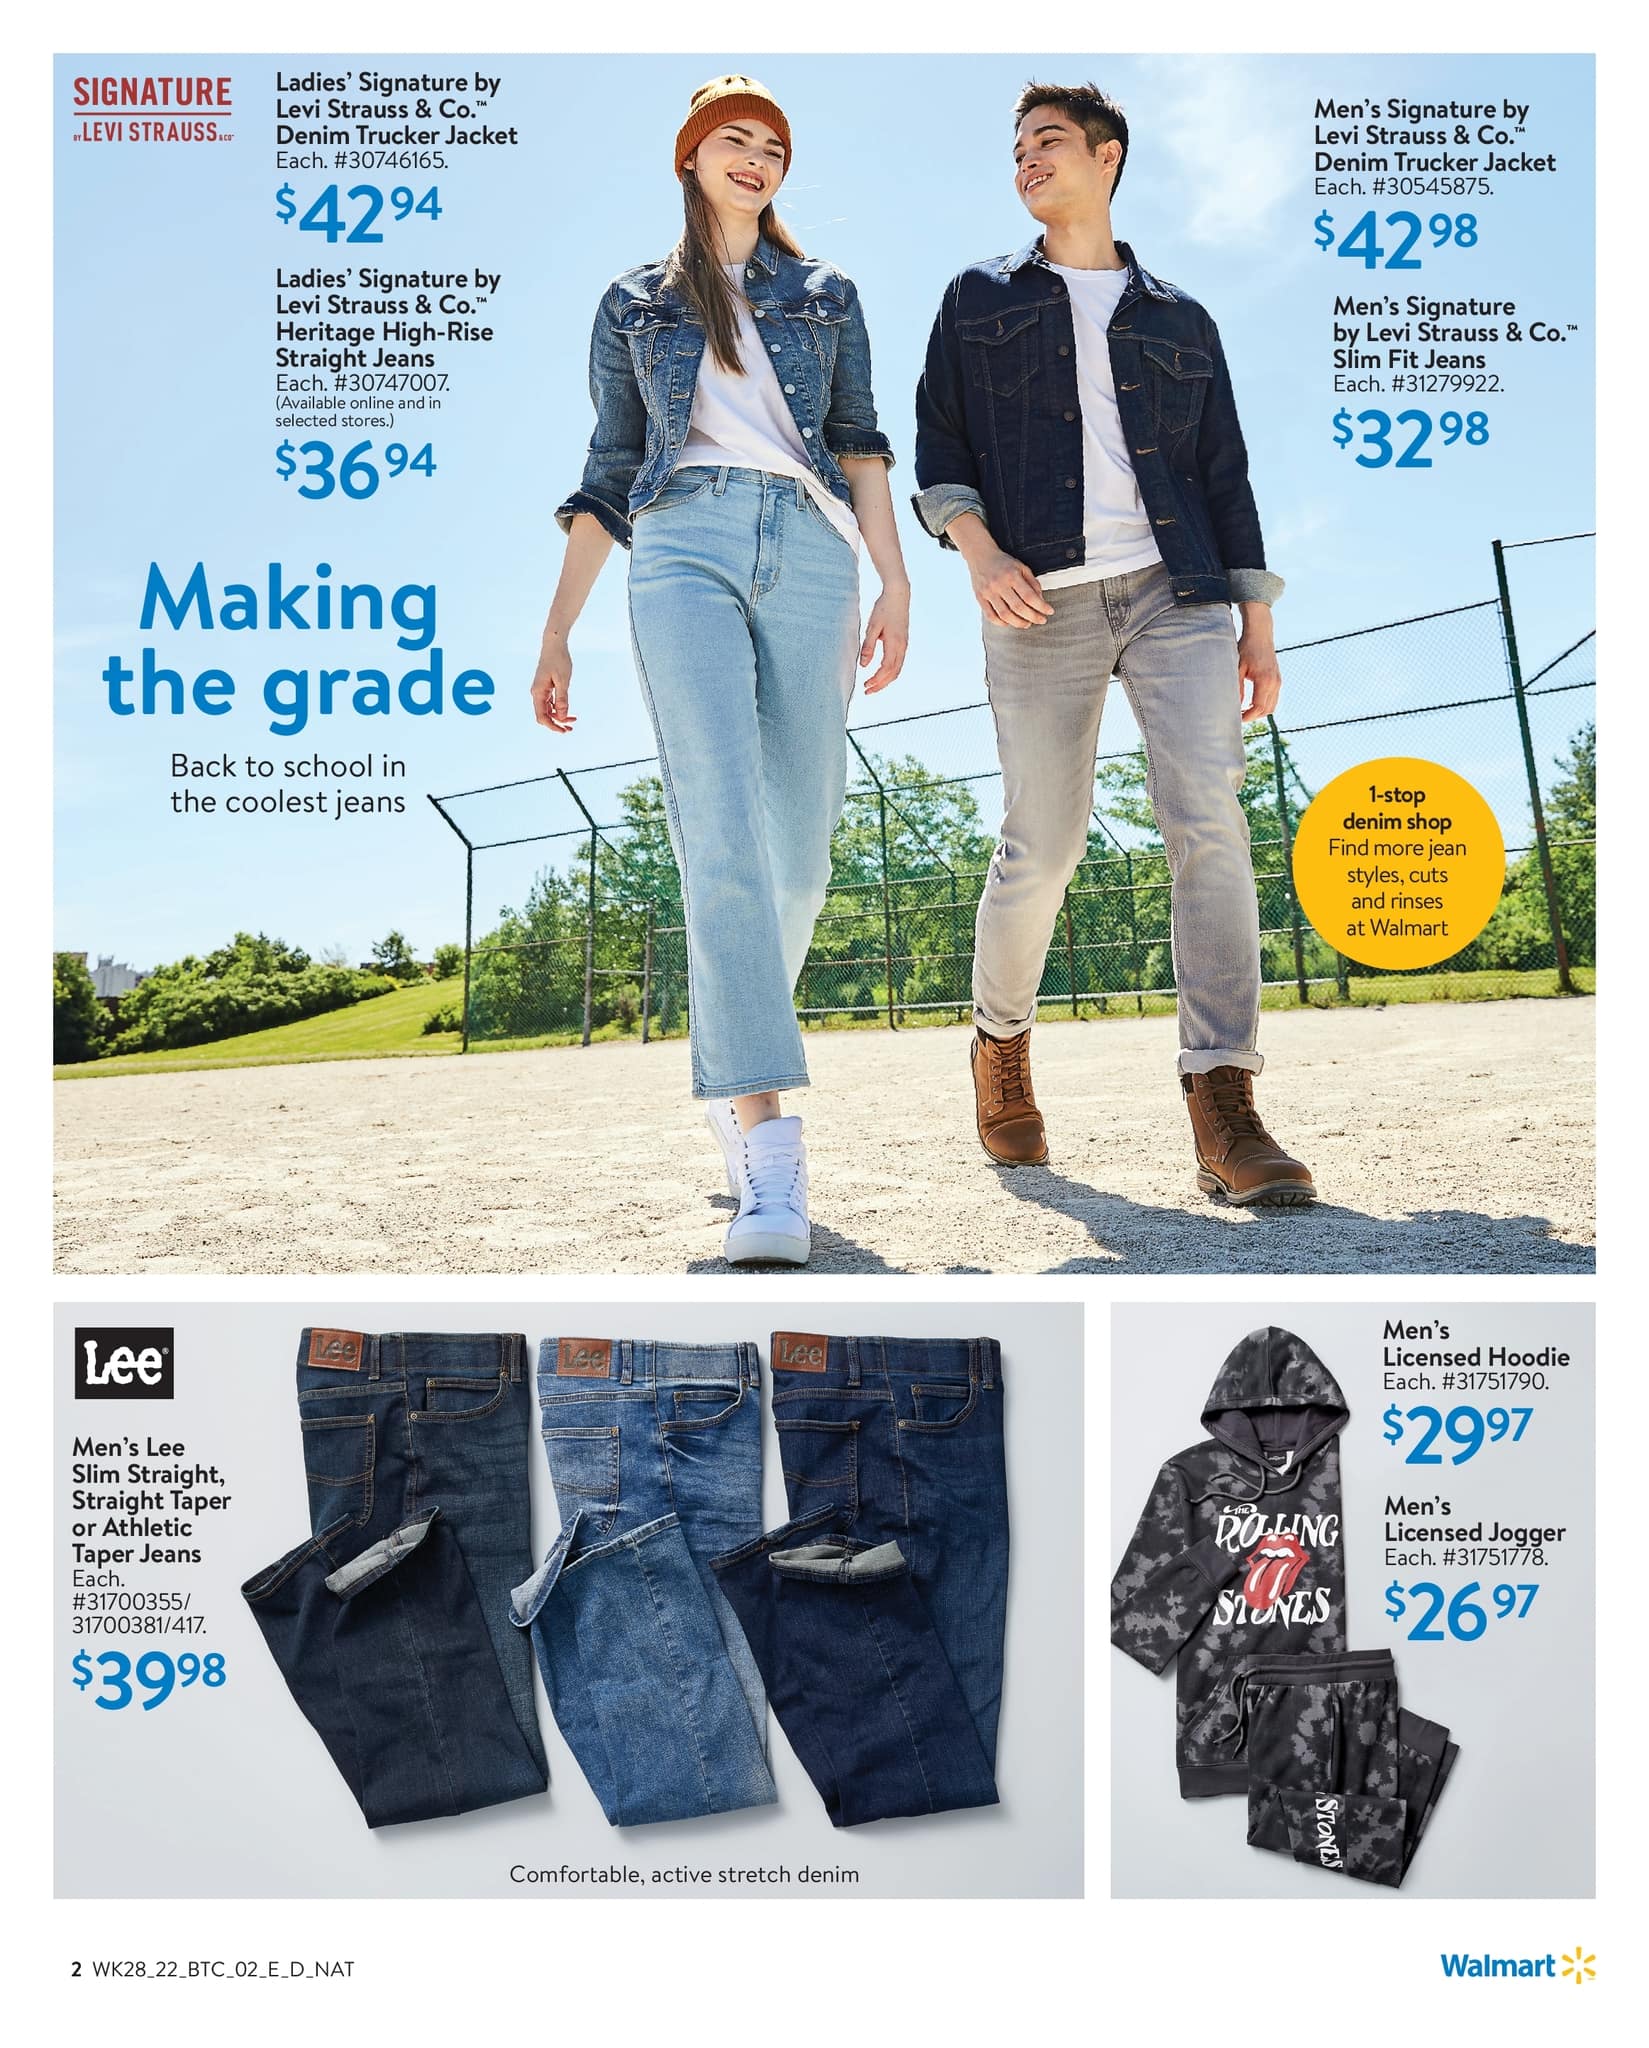 Walmart - Rule the Campus - Page 2